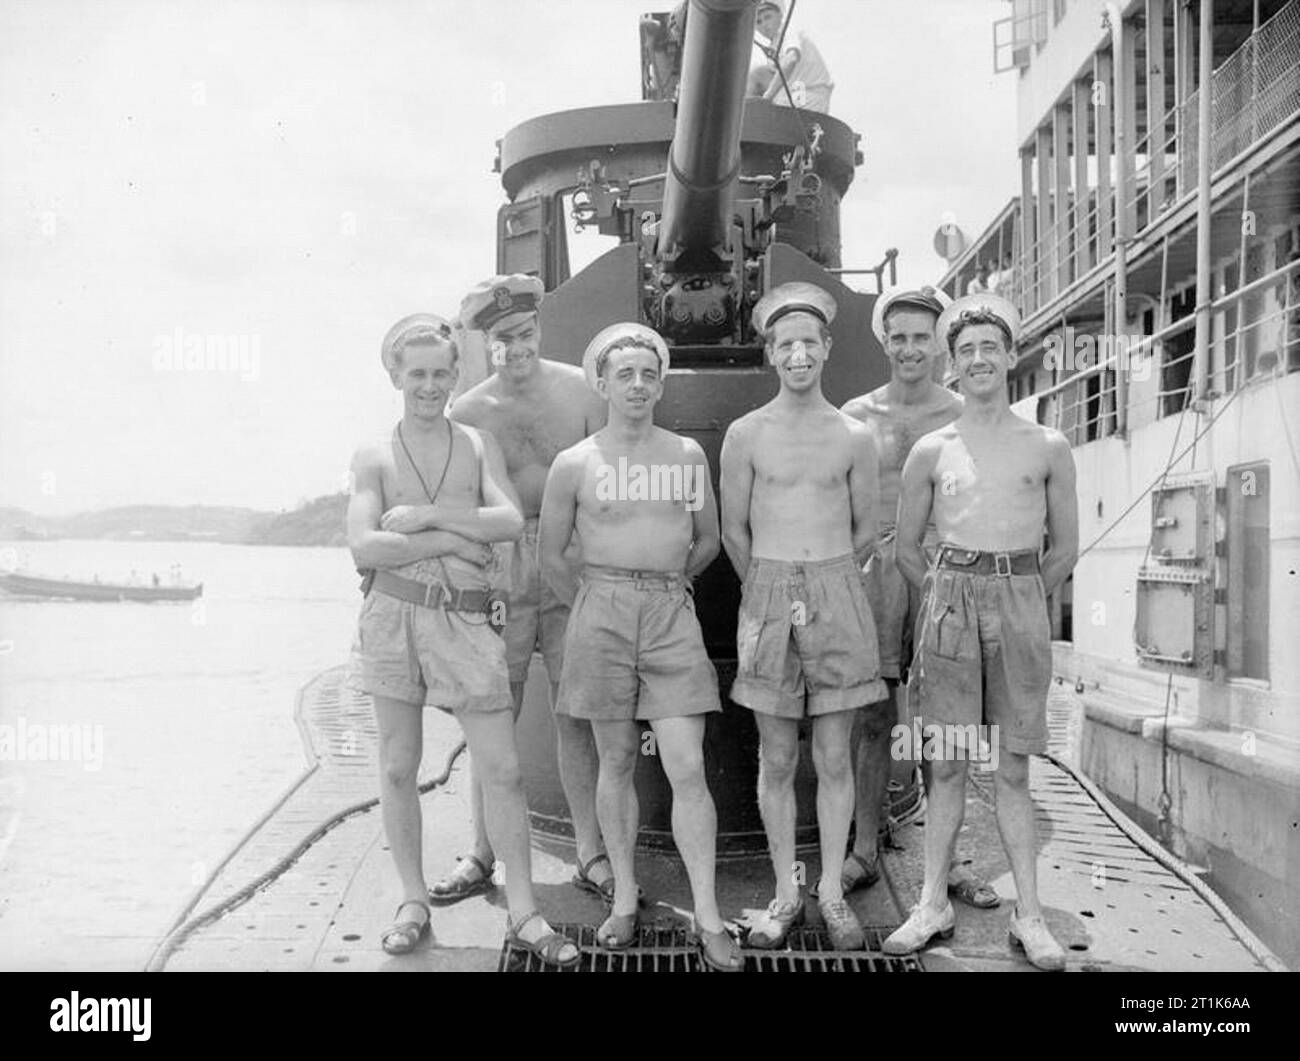 Officers and Men of HMS/M Trident. 27 July 1945. Officers and men of HMS TRIDENT, Left to right: back row: Chief Petty Officer P H Redman, Little Hampton, Sussex; Petty Officer G King, Bognor Regis. Front row: Able Seaman N M Shaw, Gosport, Hants; Petty Officer W Curtis, Ashford, Kent; Leading Stoker T Buddy, Gosport; Leading Telegraphist W Adams, Gosport. Stock Photo